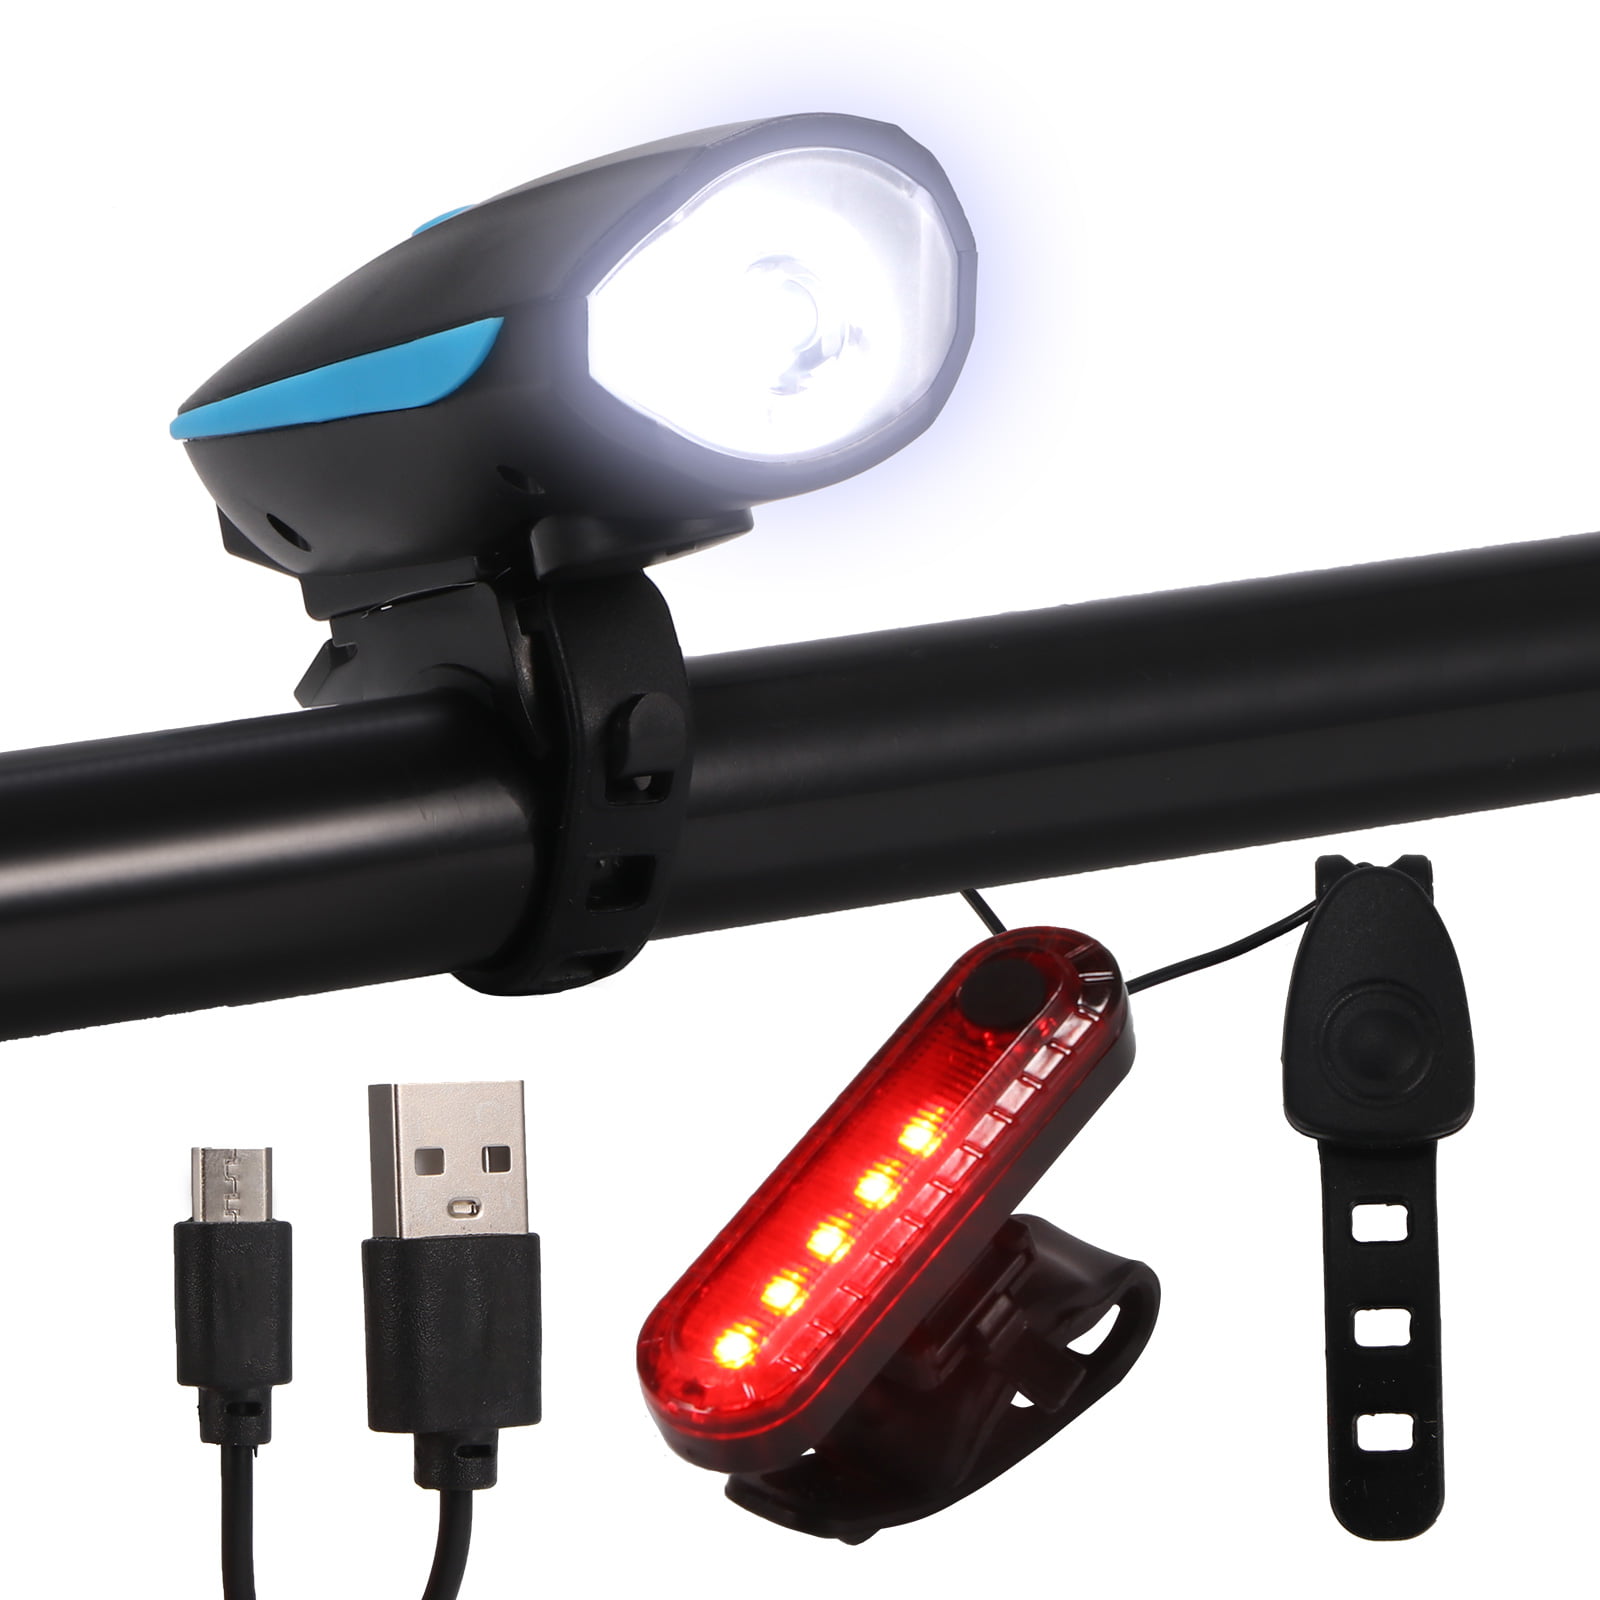 LBgrandspec Bicycle Accessory,Bicycle Bike T6 LED Light Headlight 120db Horn Smart Display USB Rechargeable 